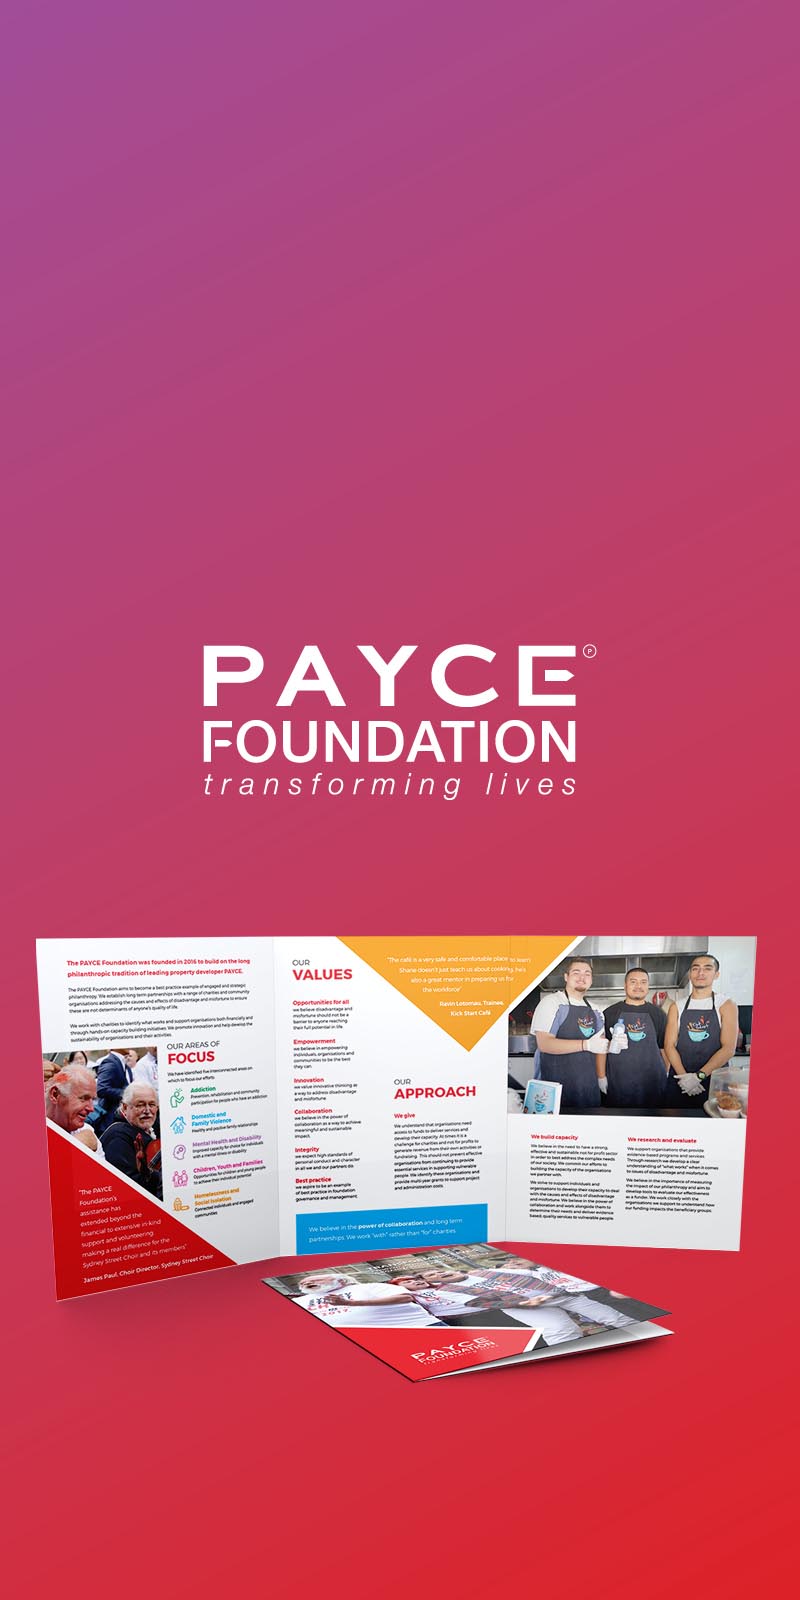 Payce HTML Invitation design by Think Creative Agency